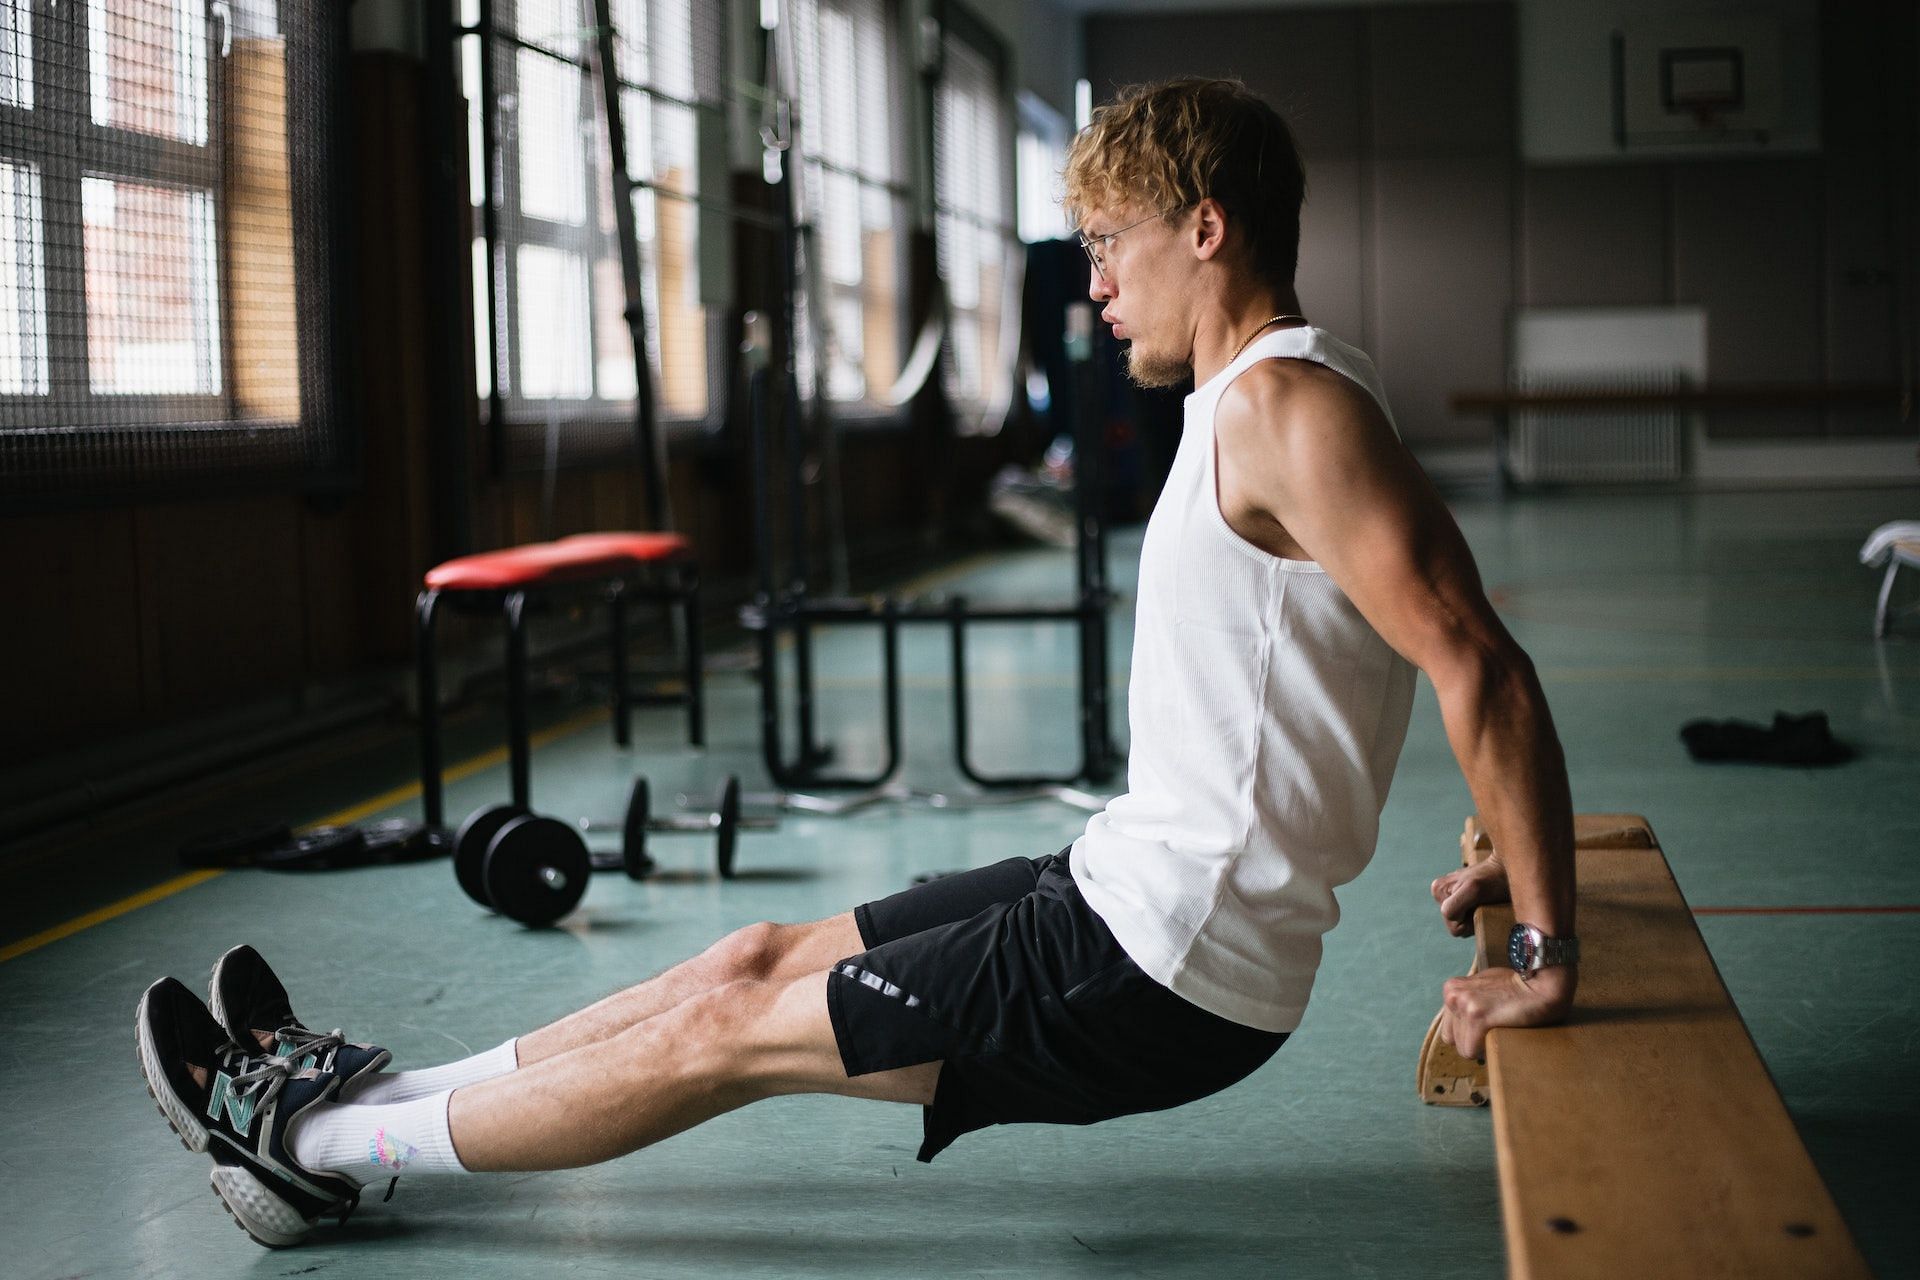 Bench dips are a great dips exercise to add to your workout. (Photo via Pexels/Sinitta Leunen)